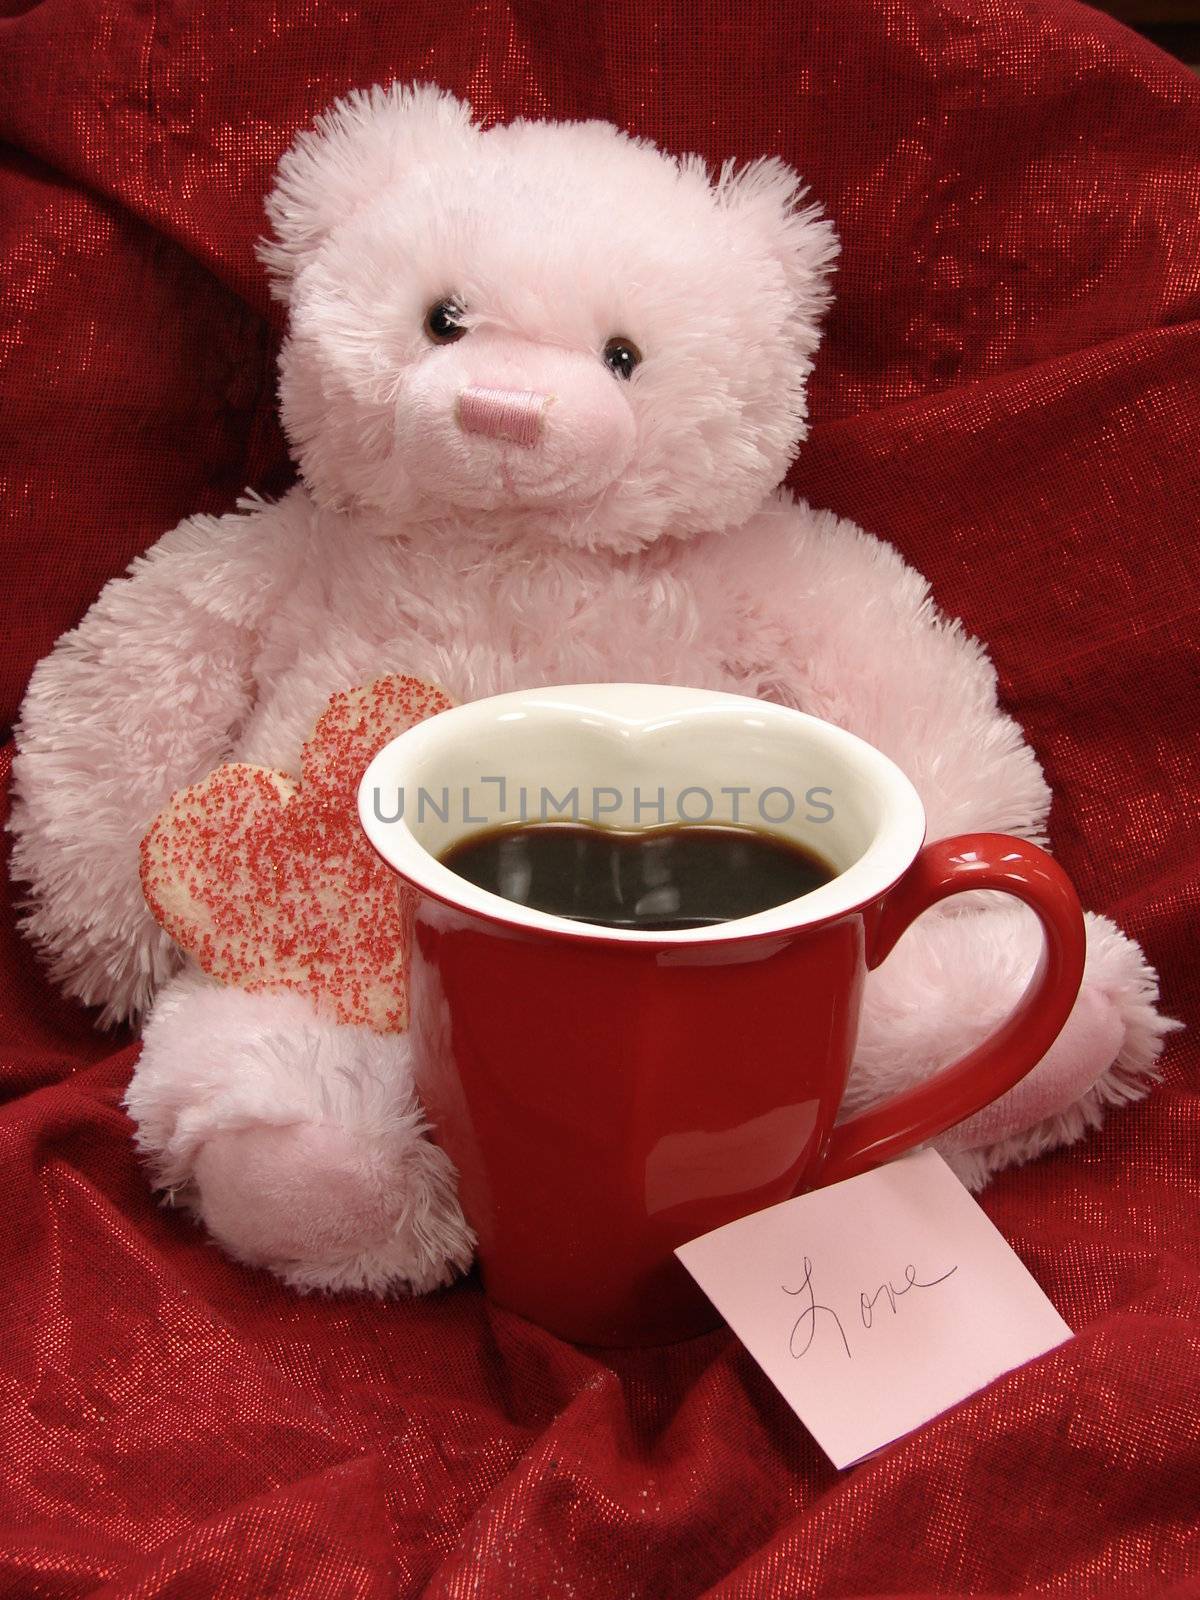 Pink Valentine bear with heart shaped cookie and heart coffee mug. Love Note, Red fabric background.